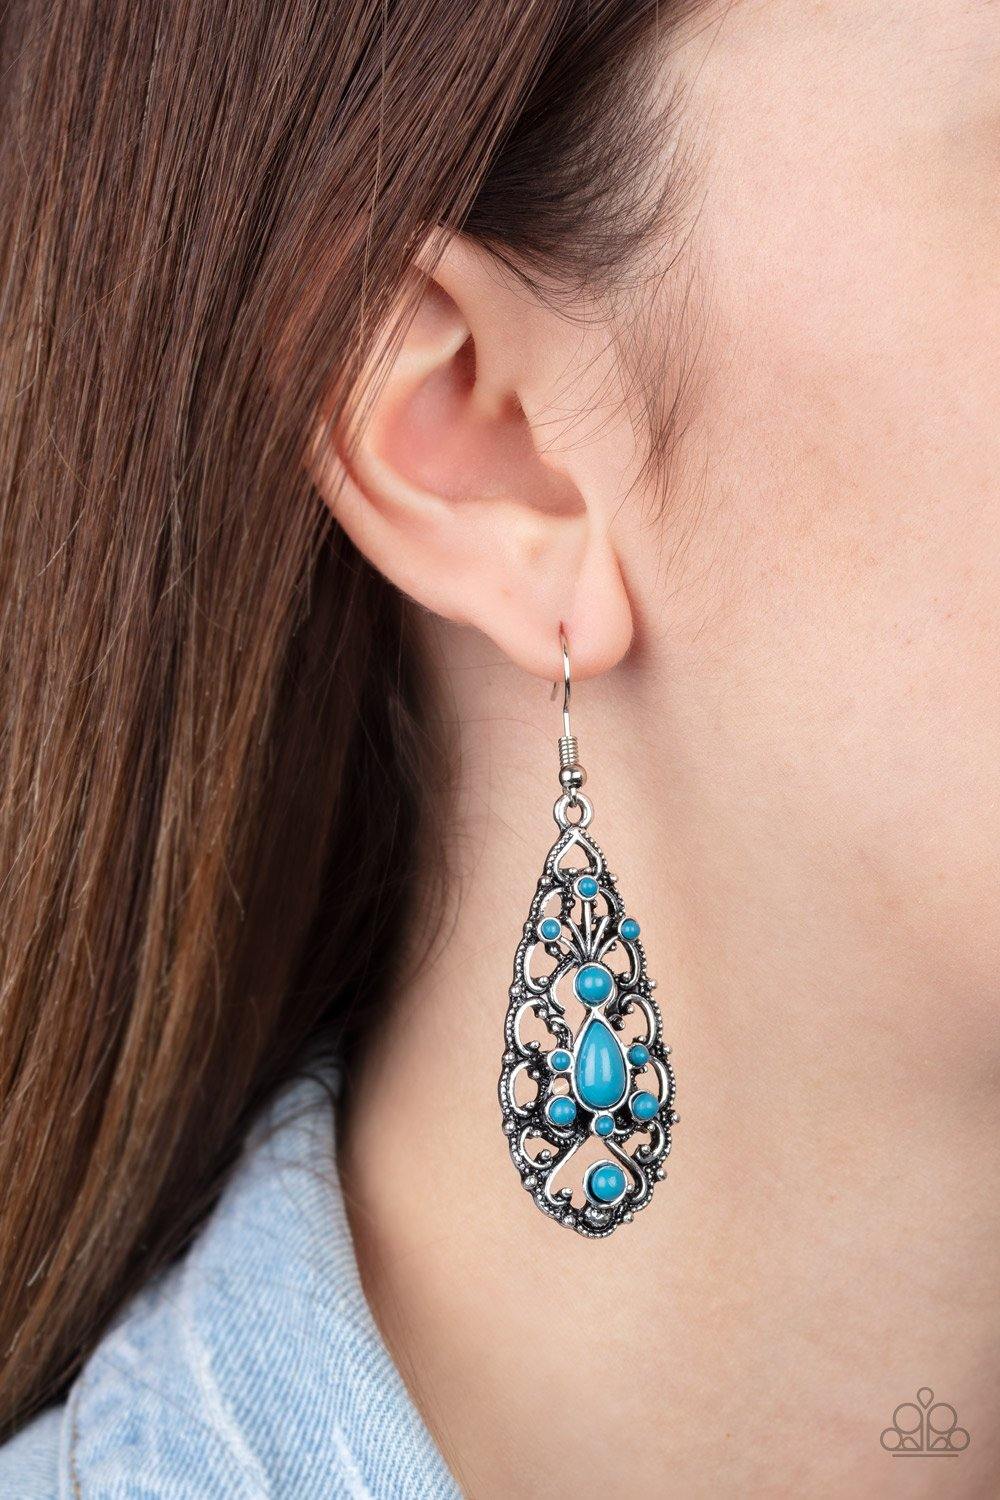 Fantastically Fanciful - Blue Earrings - Paparazzi Accessories - Sassysblingandthings